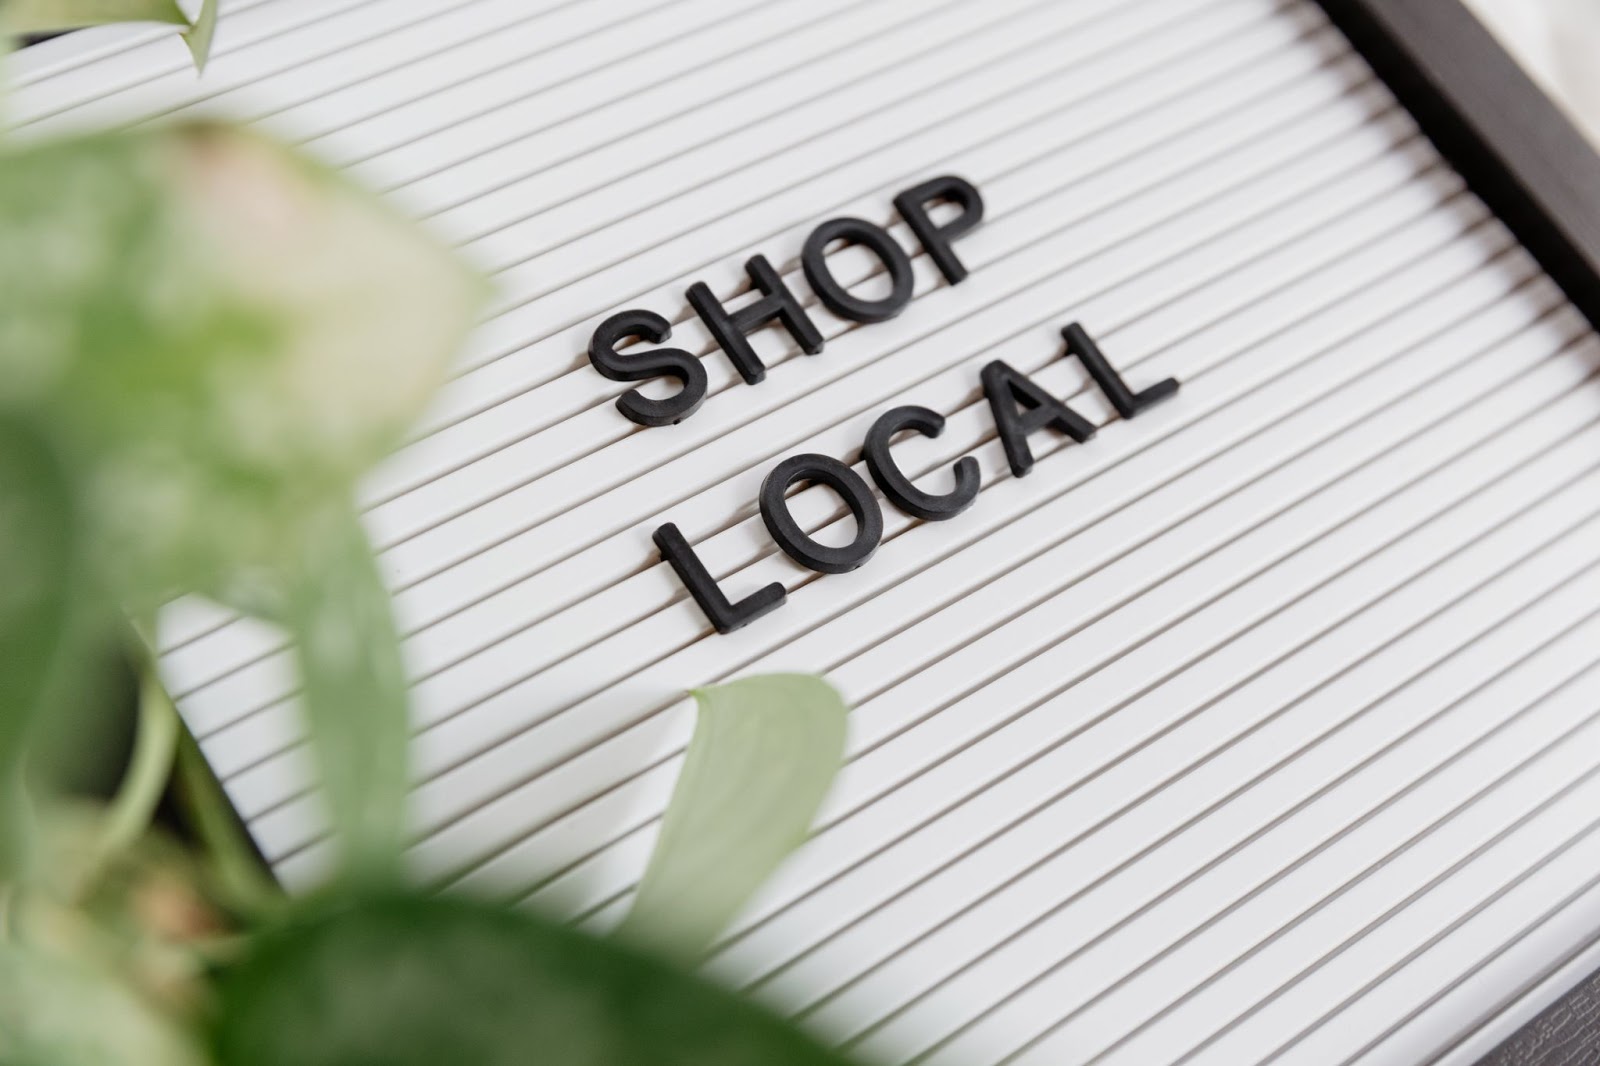 Local shopping trends: Opportunity and challenges for businesses